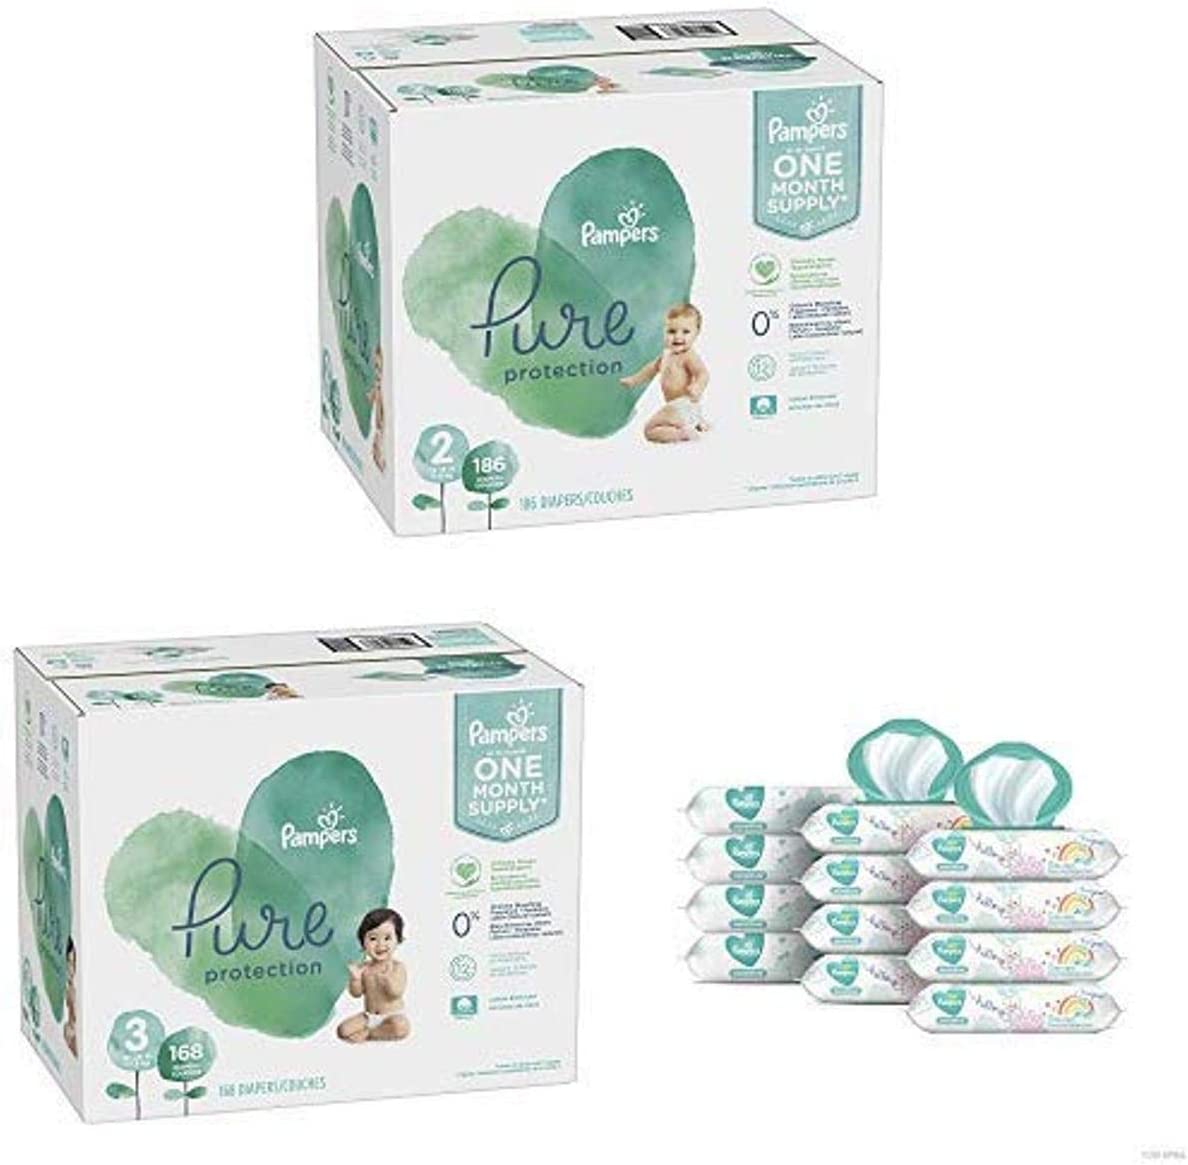 Pampers Bundle – Pure Disposable Baby Diapers Sizes 2, 186 Count & 3, 168 Count with Pampers Sensitive Water-Based Baby Wipes, 12 Pop-Top and Refill Combo Packs, 864 Count